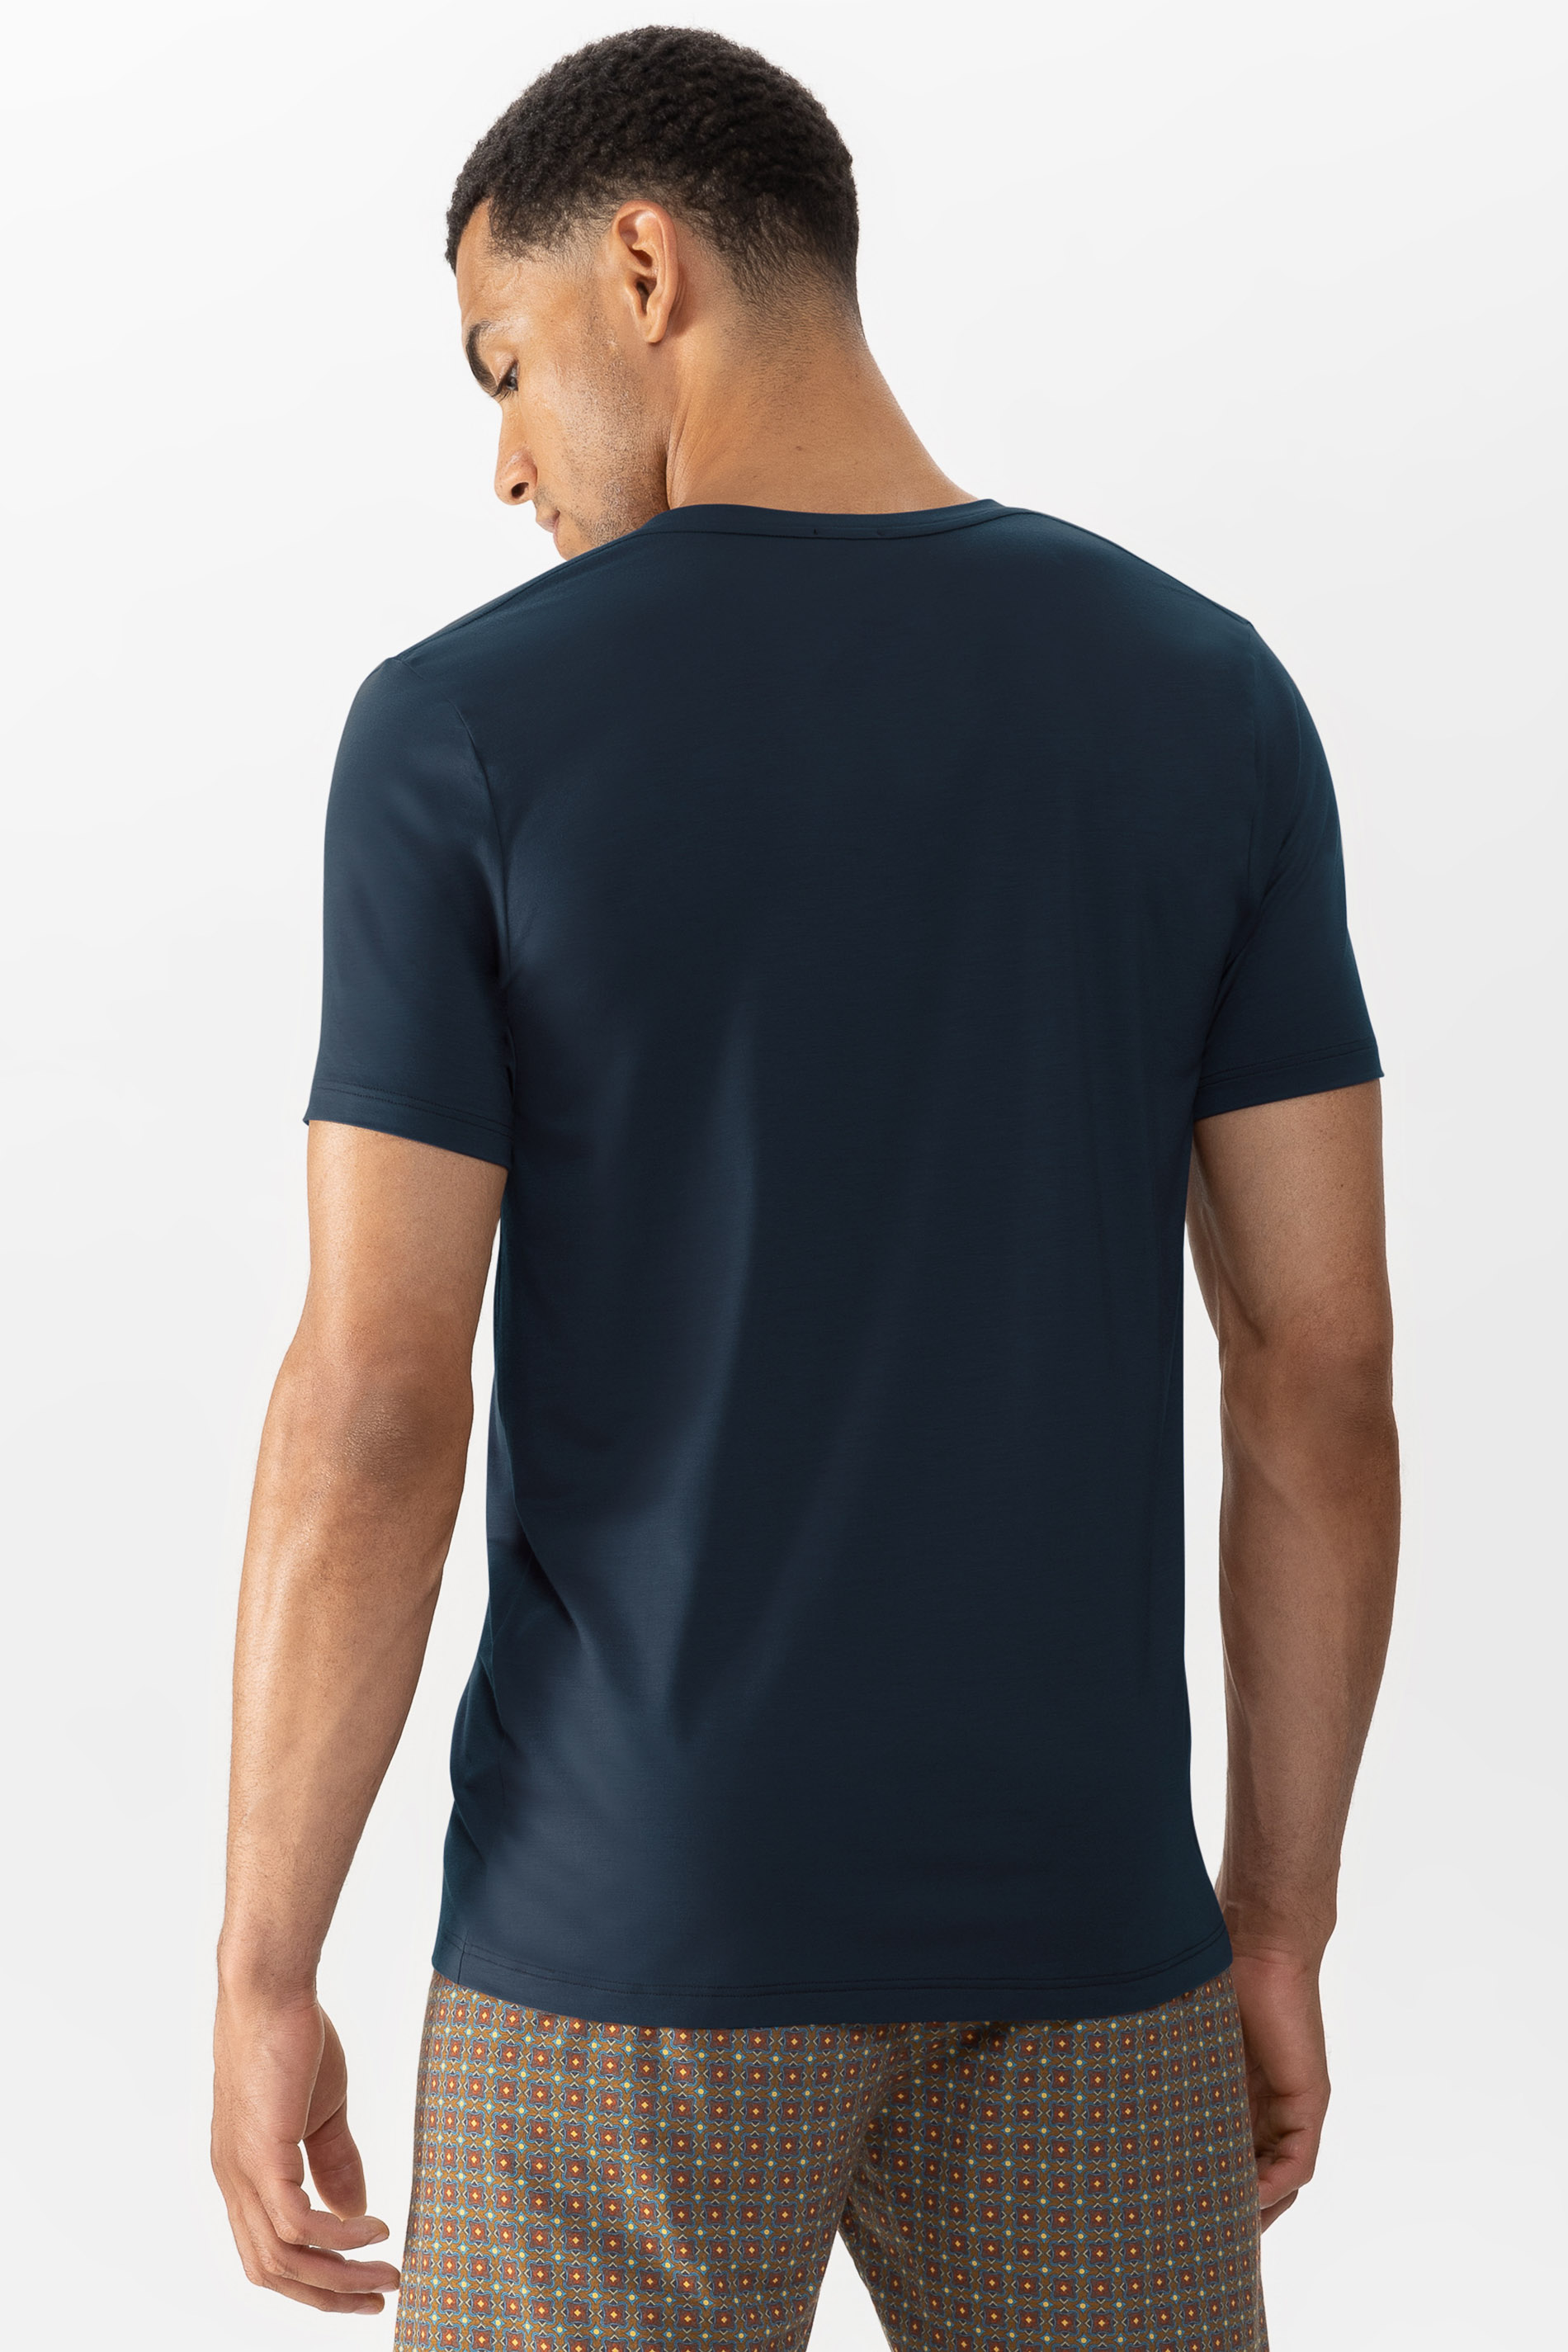 T-shirt Serie Selection Rear View | mey®